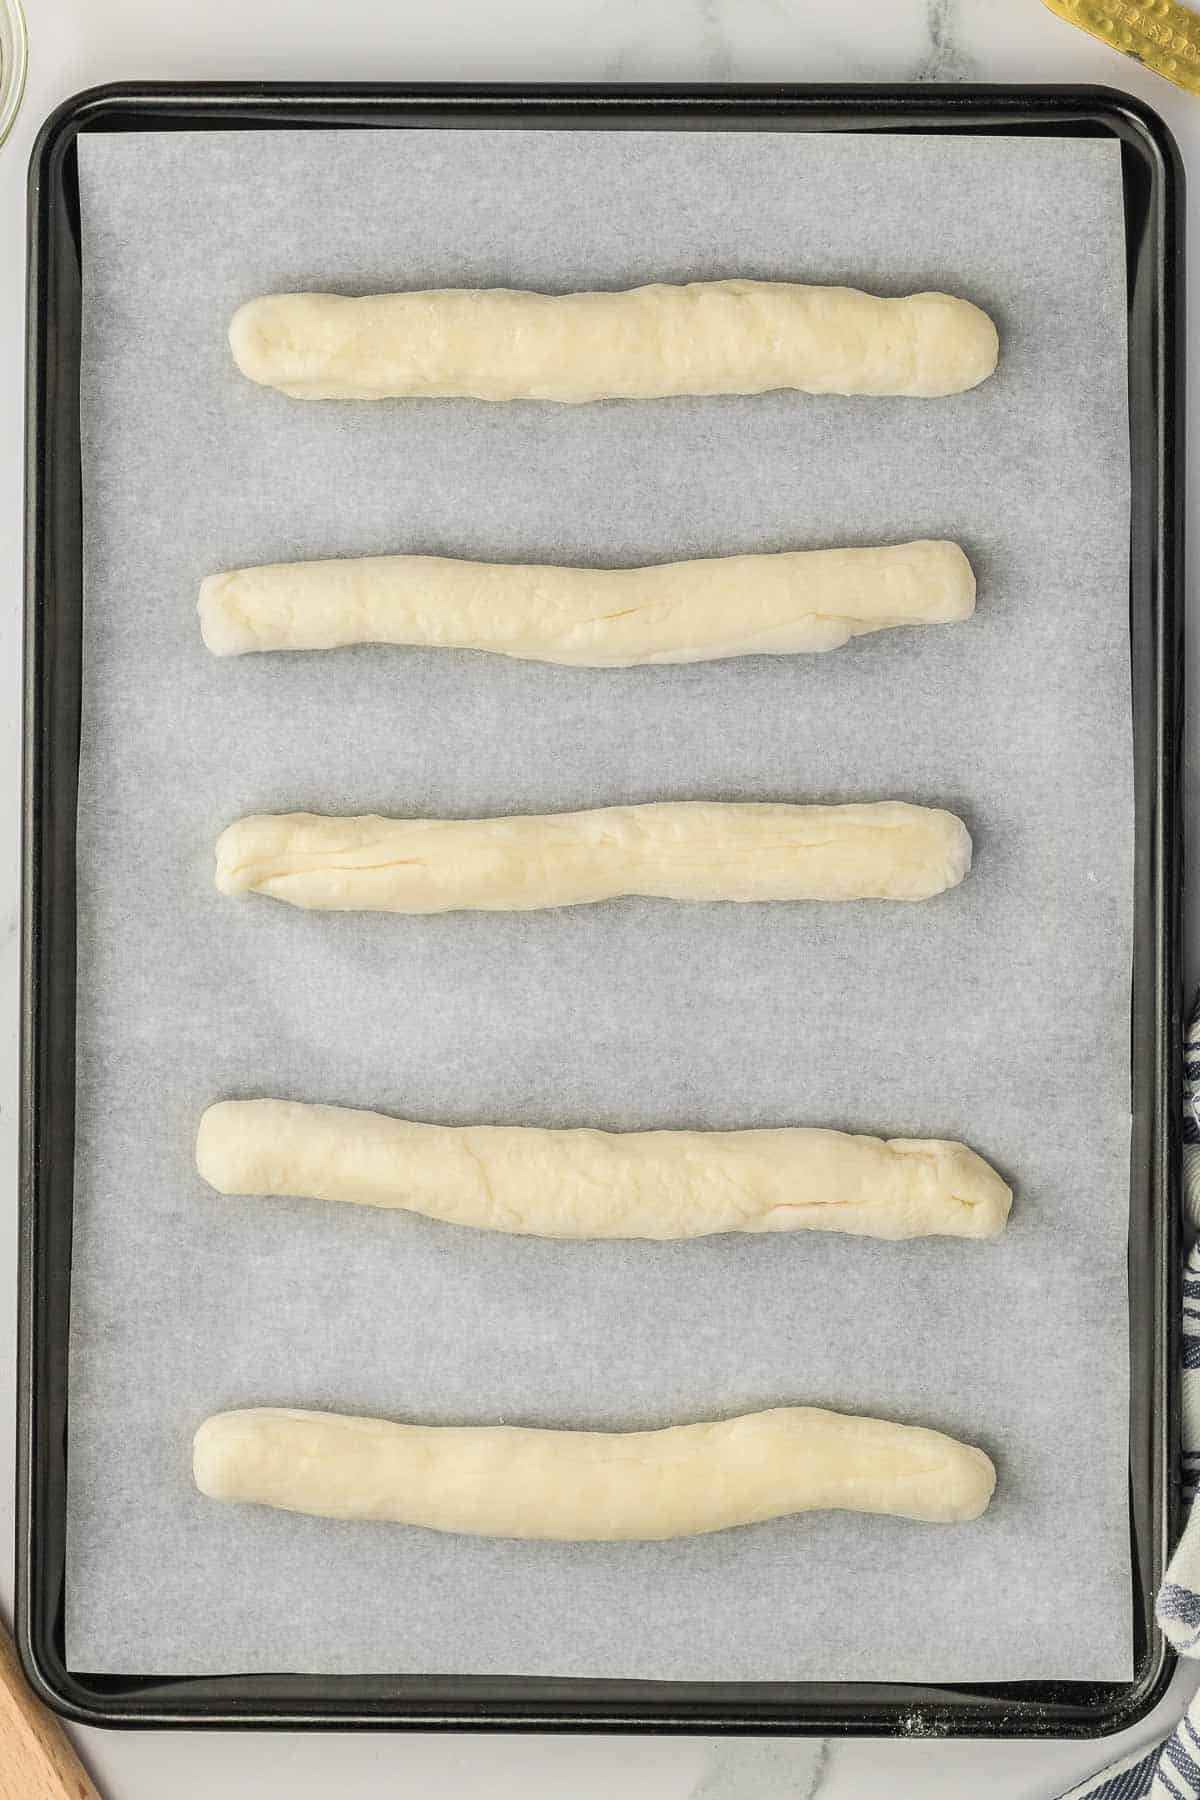 A baking sheet with rolled bread dough on it.